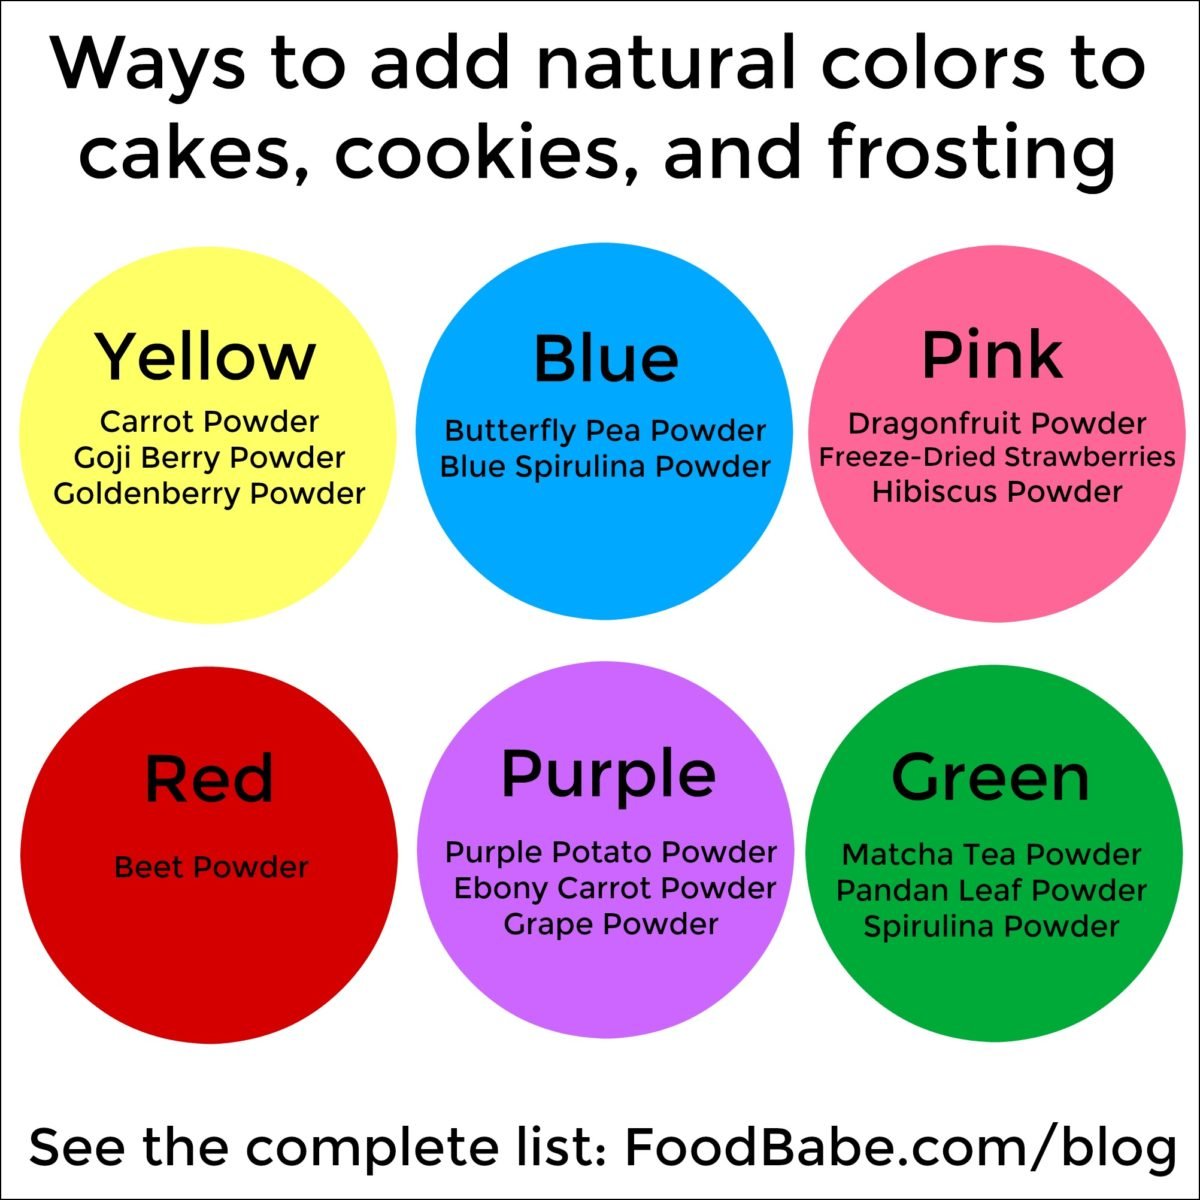 Natural Food Colors, Natural Food Dyes, Natural Food Coloring/Dyes